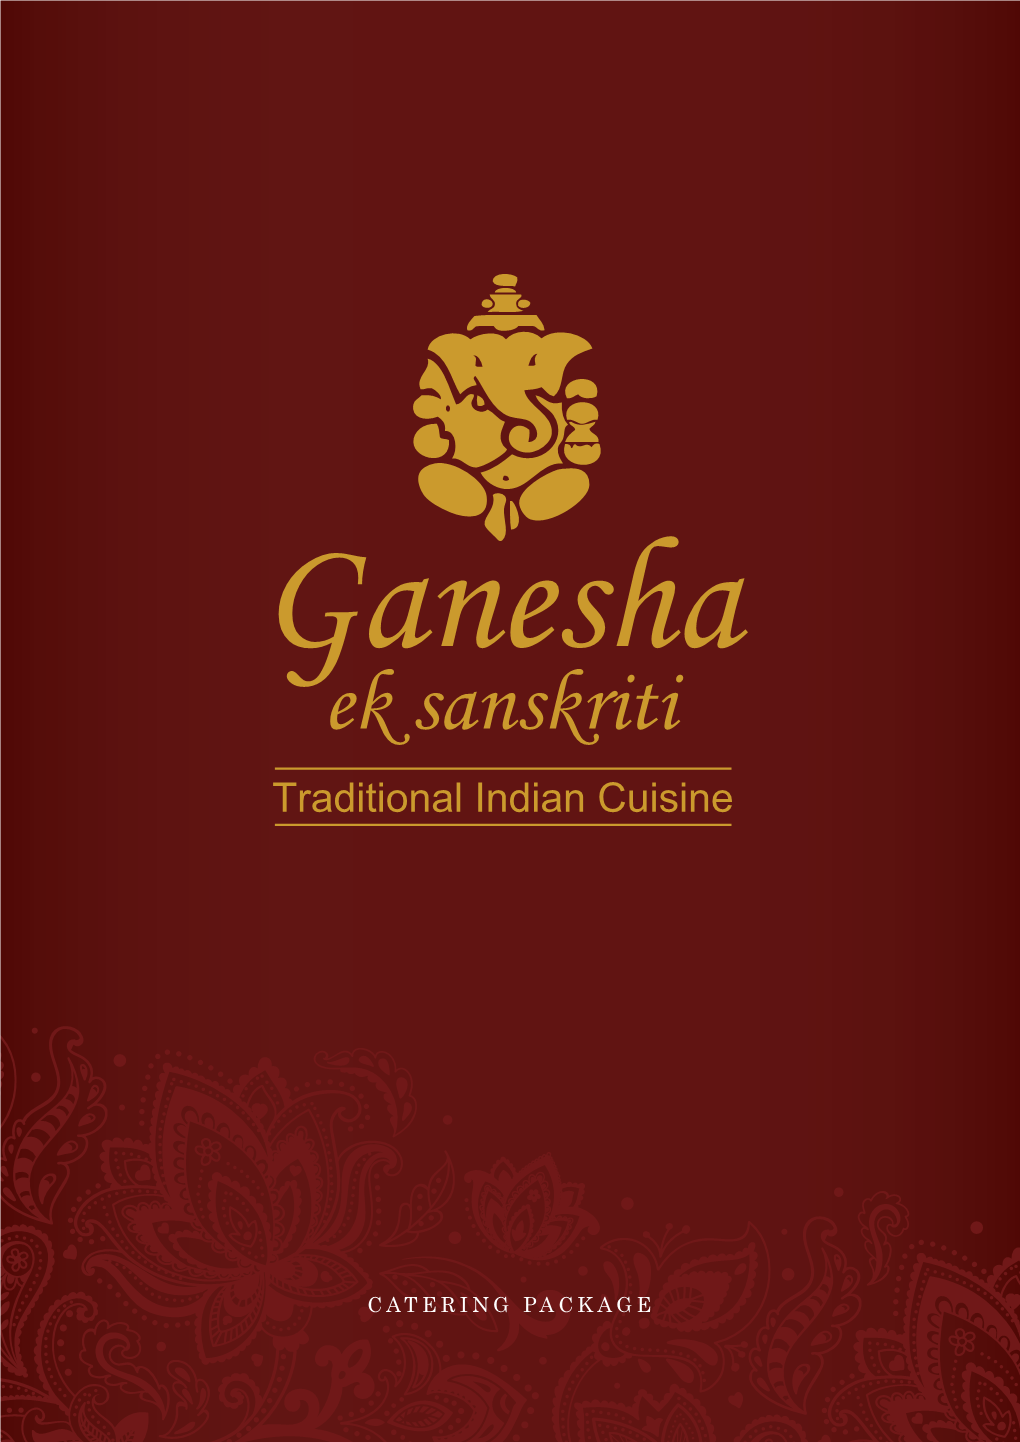 CATERING PACKAGE Welcome to Ganesha, Let Your Taste Buds Embark on a Journey to India